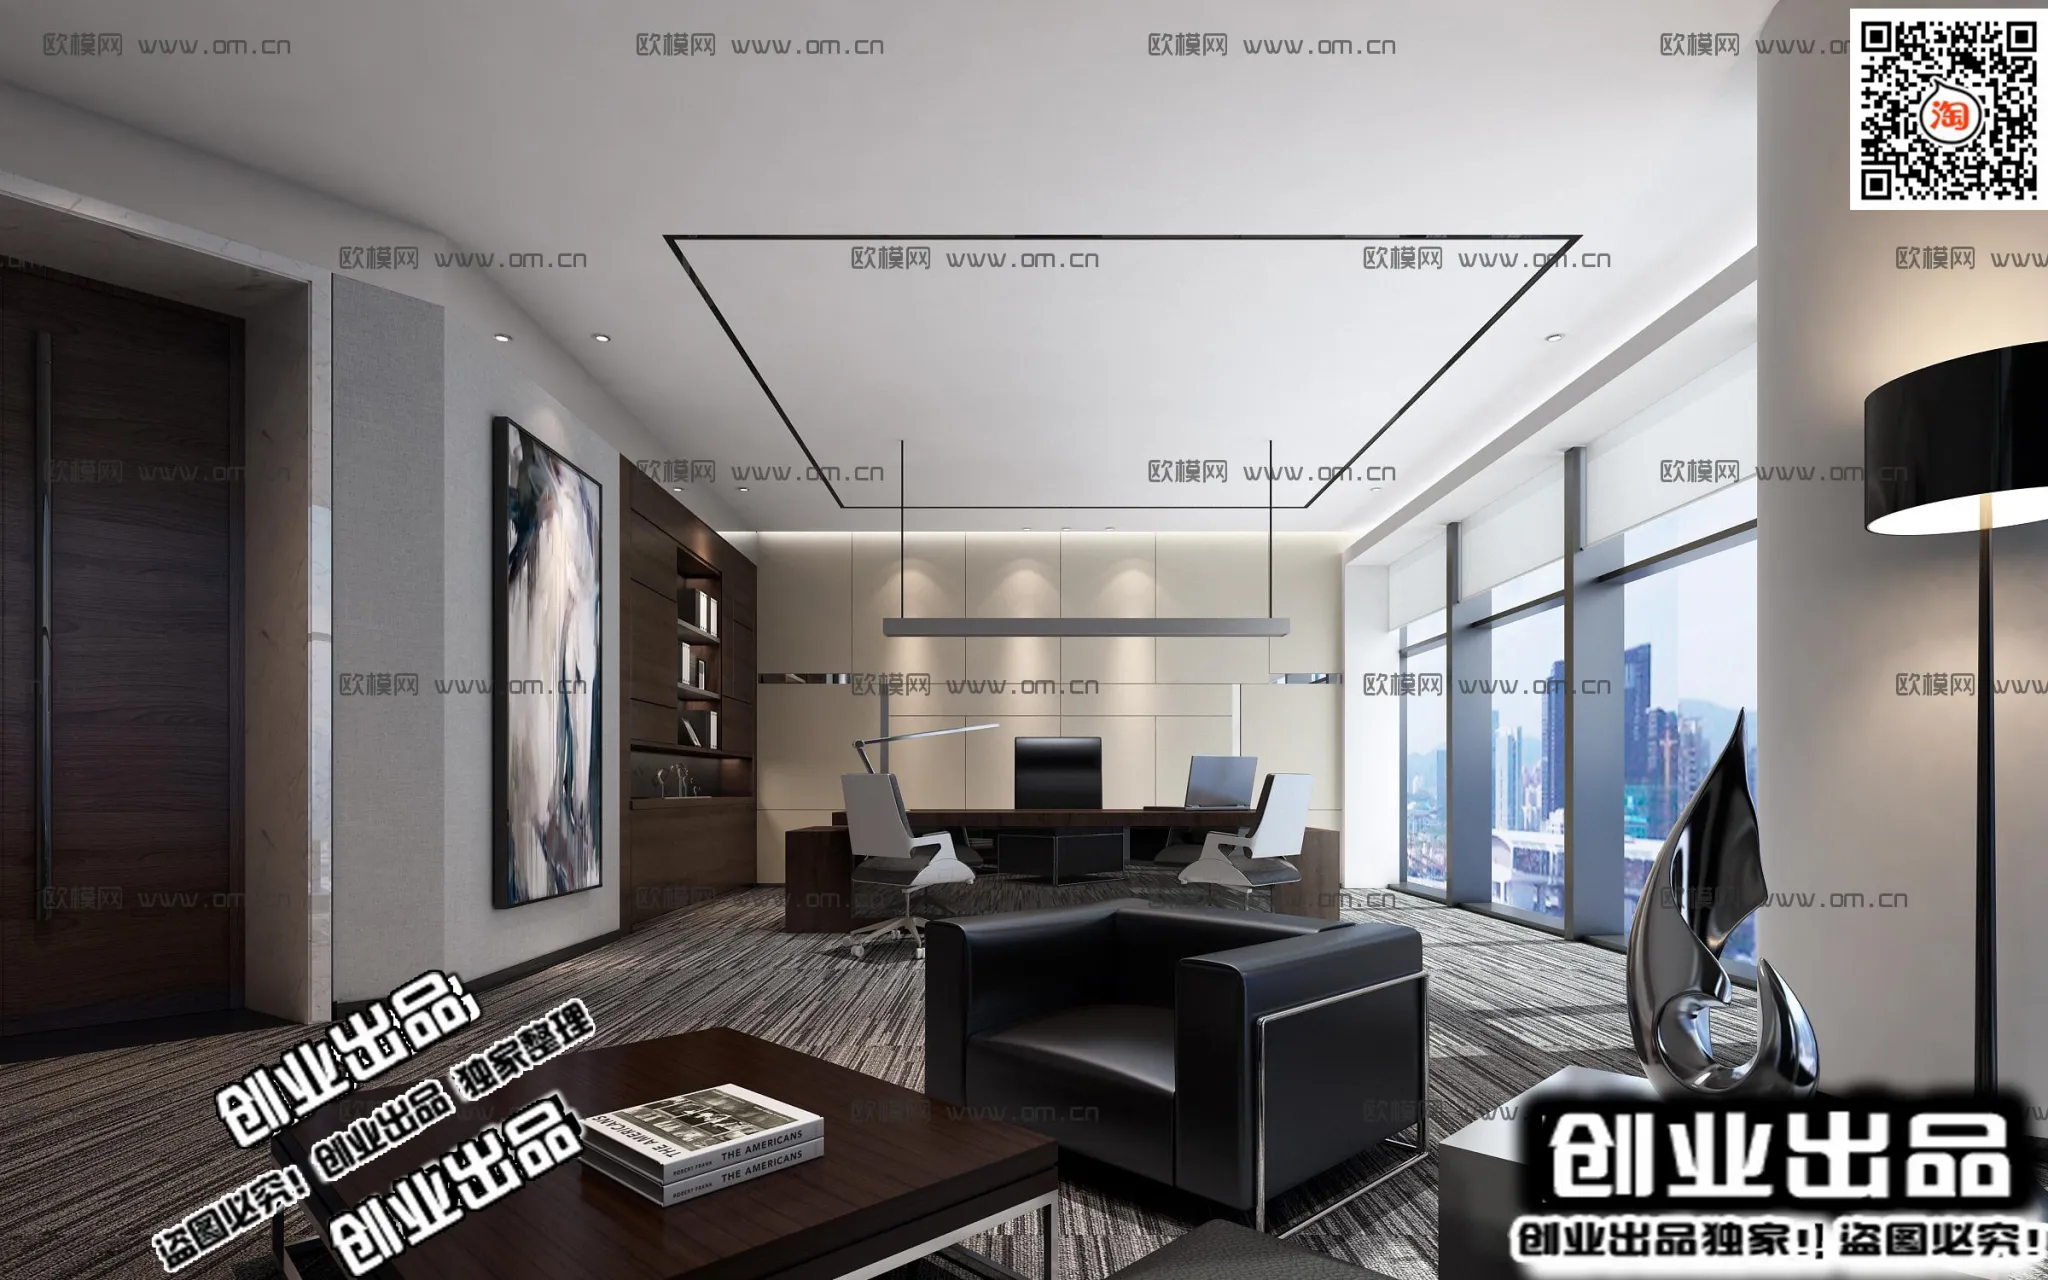 3D OFFICE INTERIOR (VRAY) – MANAGER ROOM 3D SCENES – 062